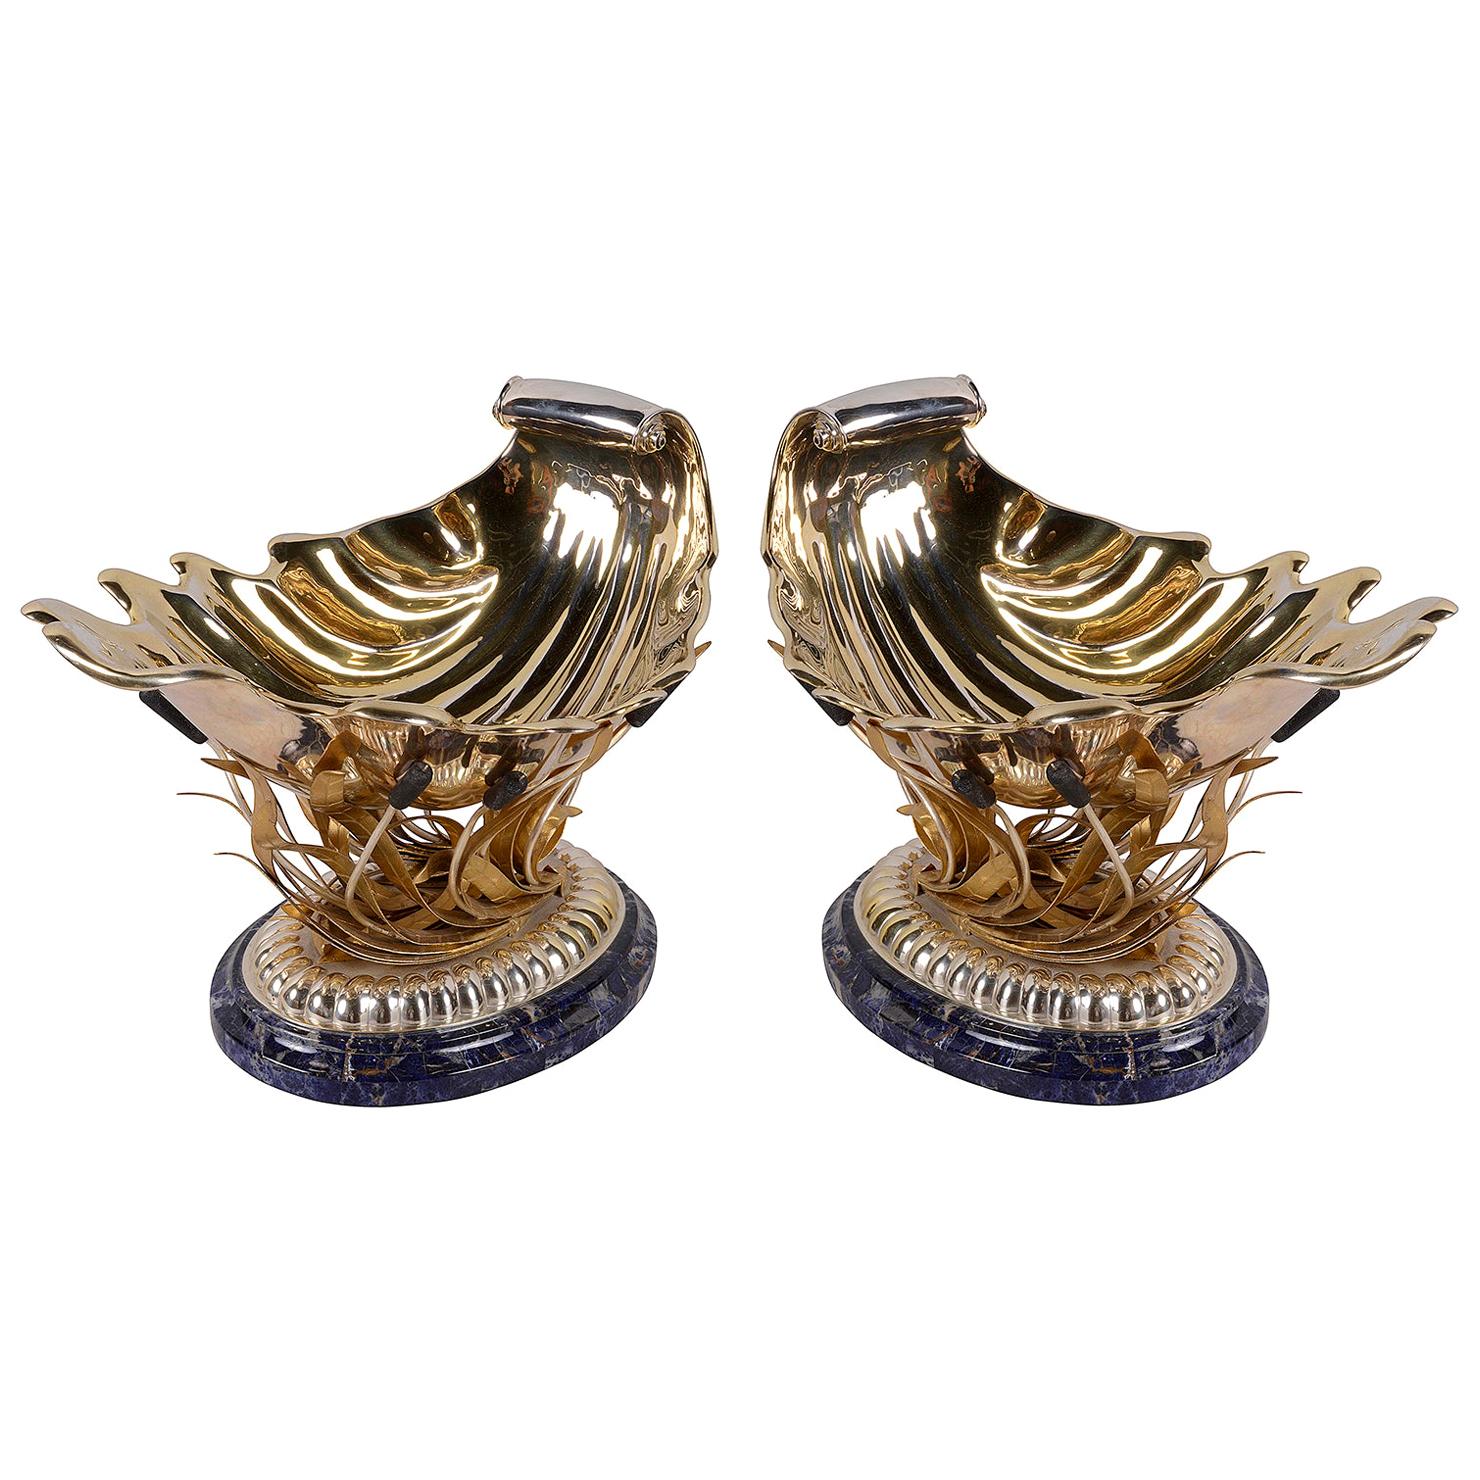 Pair of Silver Gilt and Hard Stone Jardinieres, by Mappin & Webb For Sale